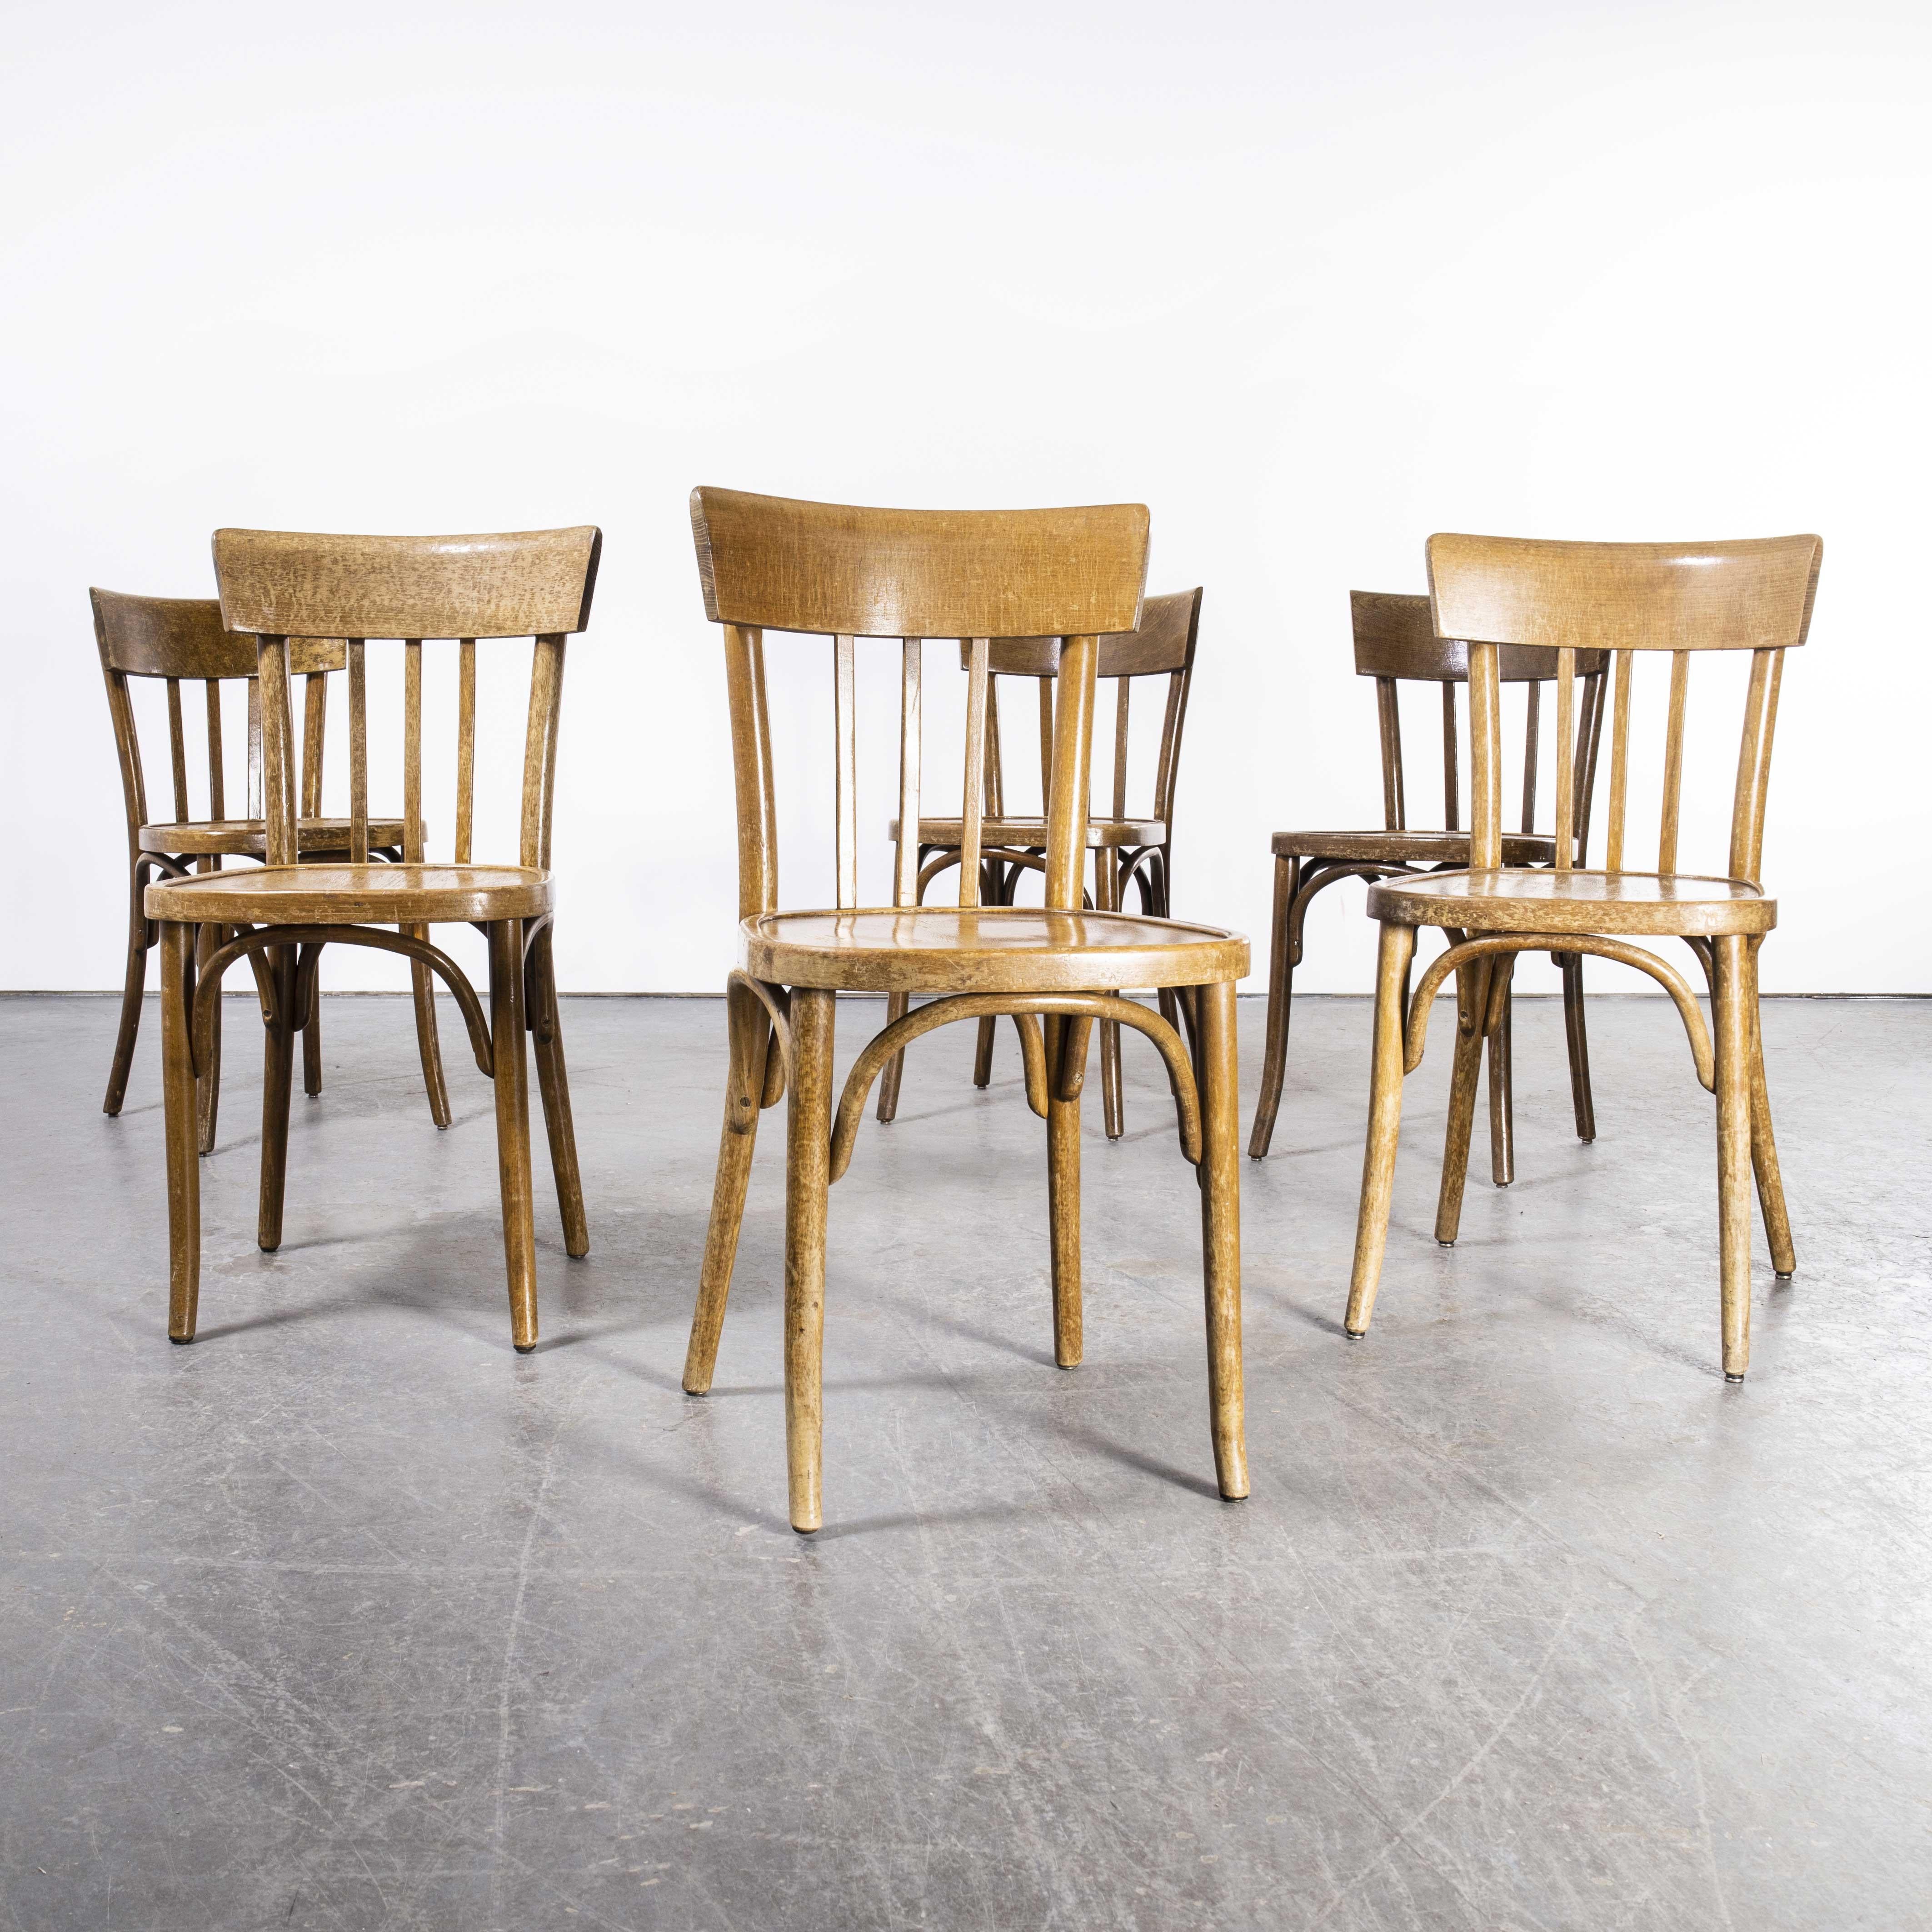 1950’s Original Thonet light oak dining chairs – set of eight
1950’s Original Thonet light oak dining chairs – set of eight. Founded in the early 19th Century by Michael Thonet, Thonet invented the process of steam bending wood under pressure and